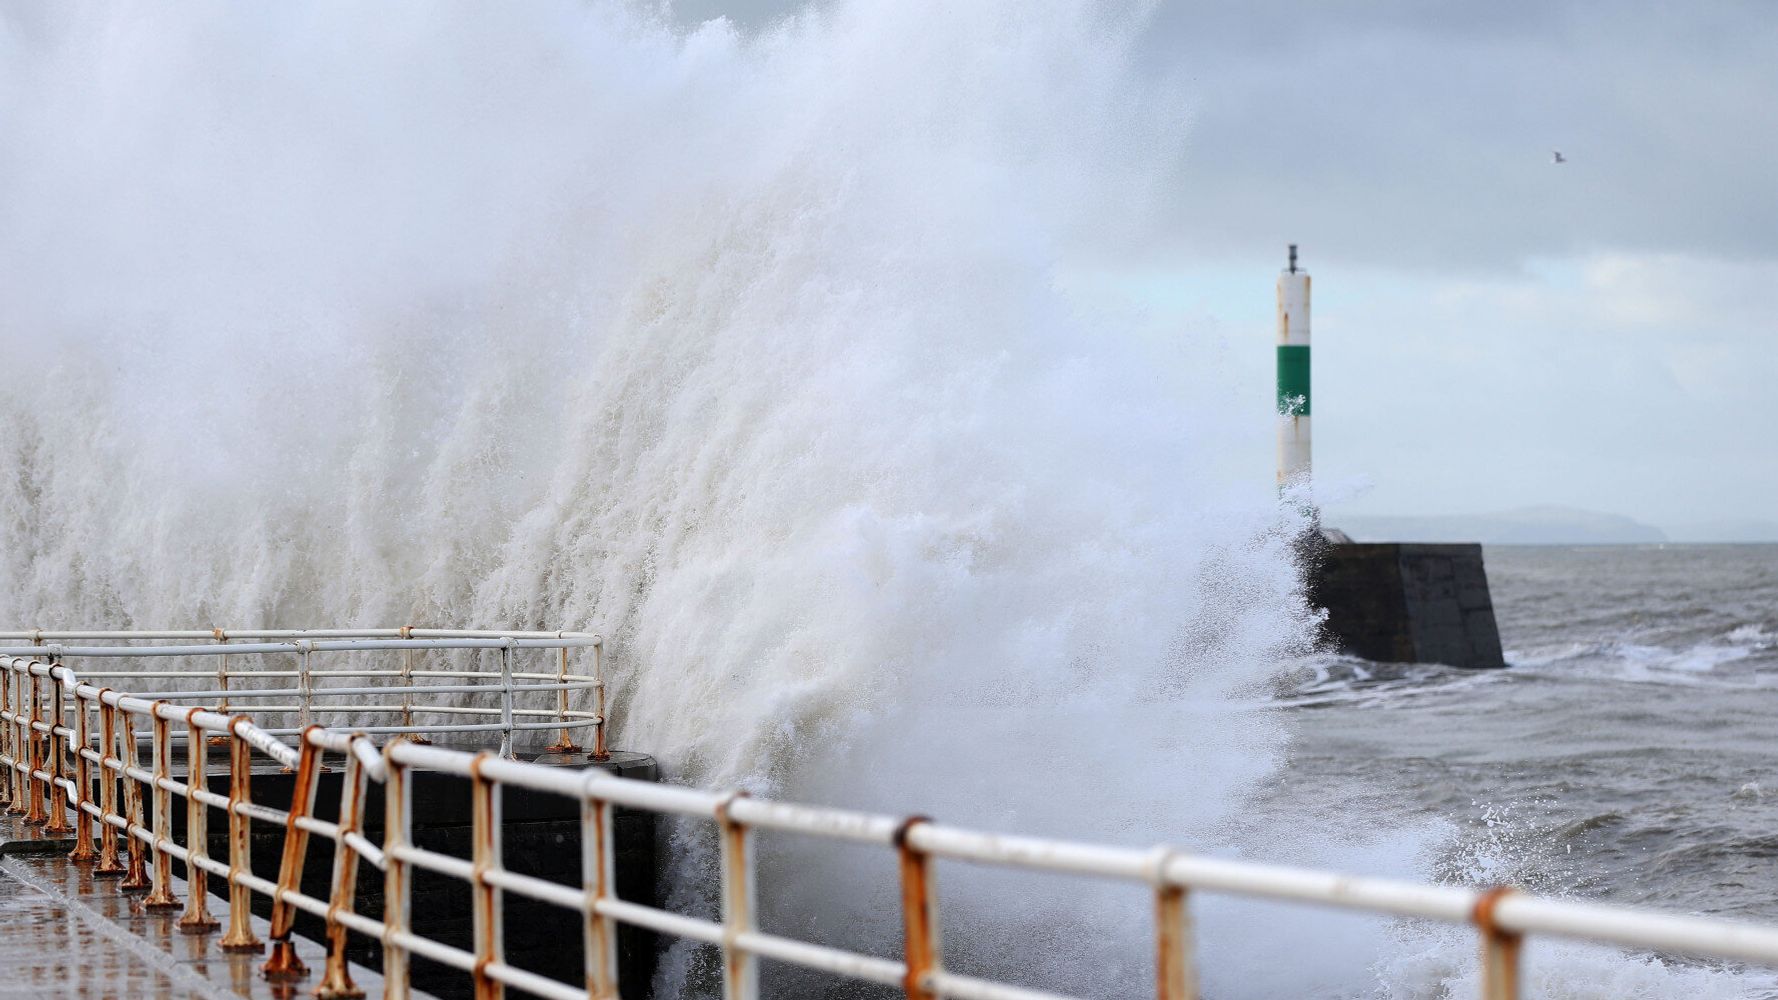 UK Has Wettest Winter On Record, Met Office Says, After Months Of Flood